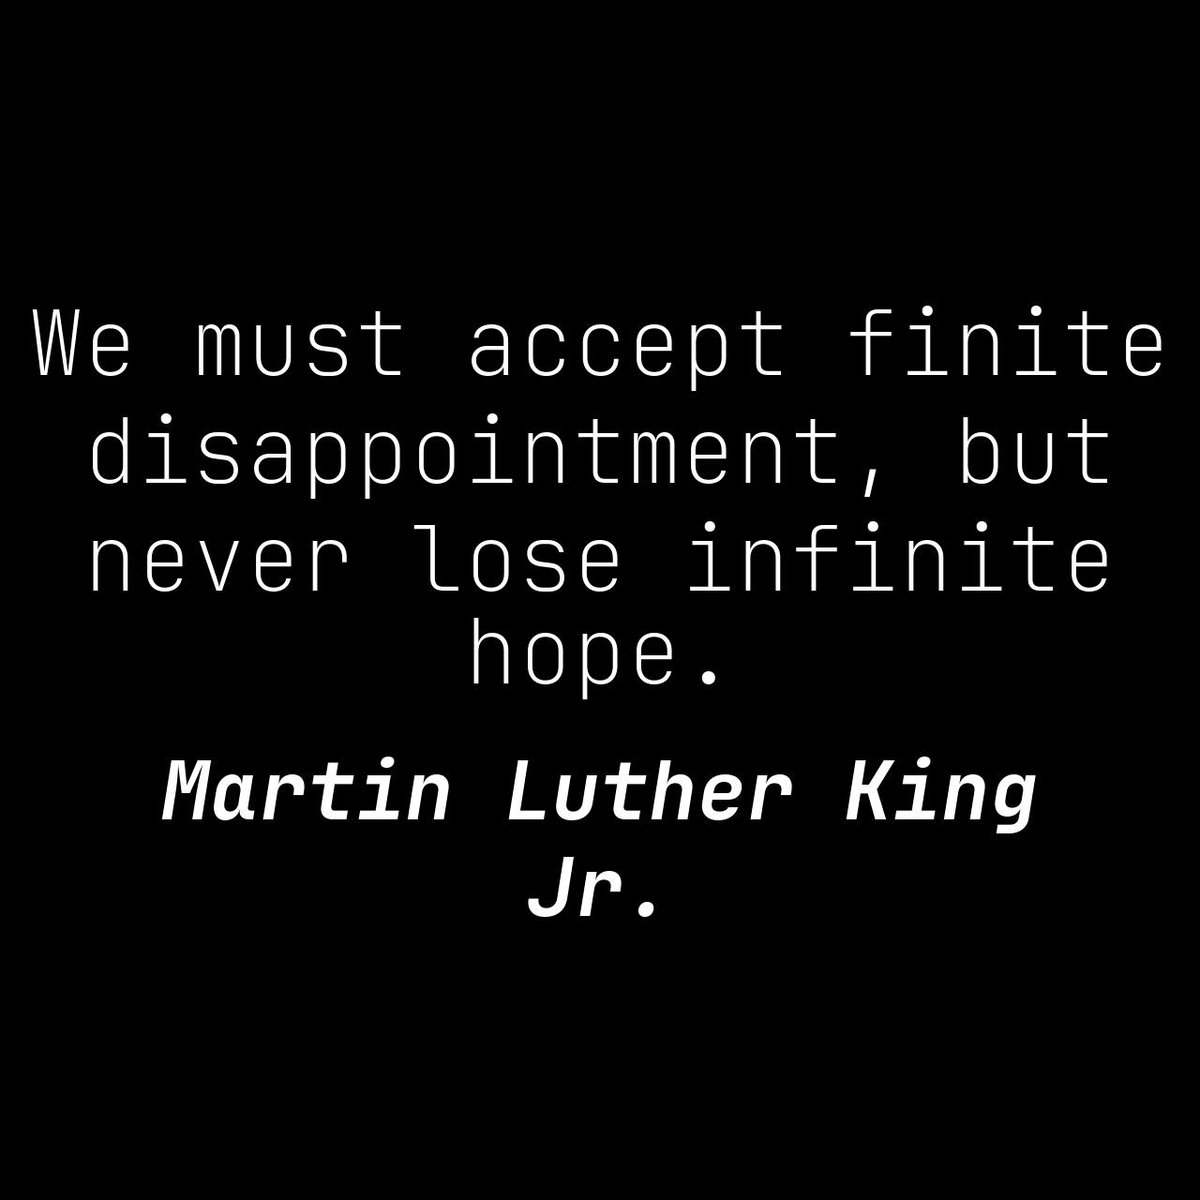 We may face setbacks, but let's embrace them with open hearts, knowing that hope knows no bounds. 💪✨ #AcceptDisappointment #NeverLoseHope #MLKJrQuotes #InfiniteHope